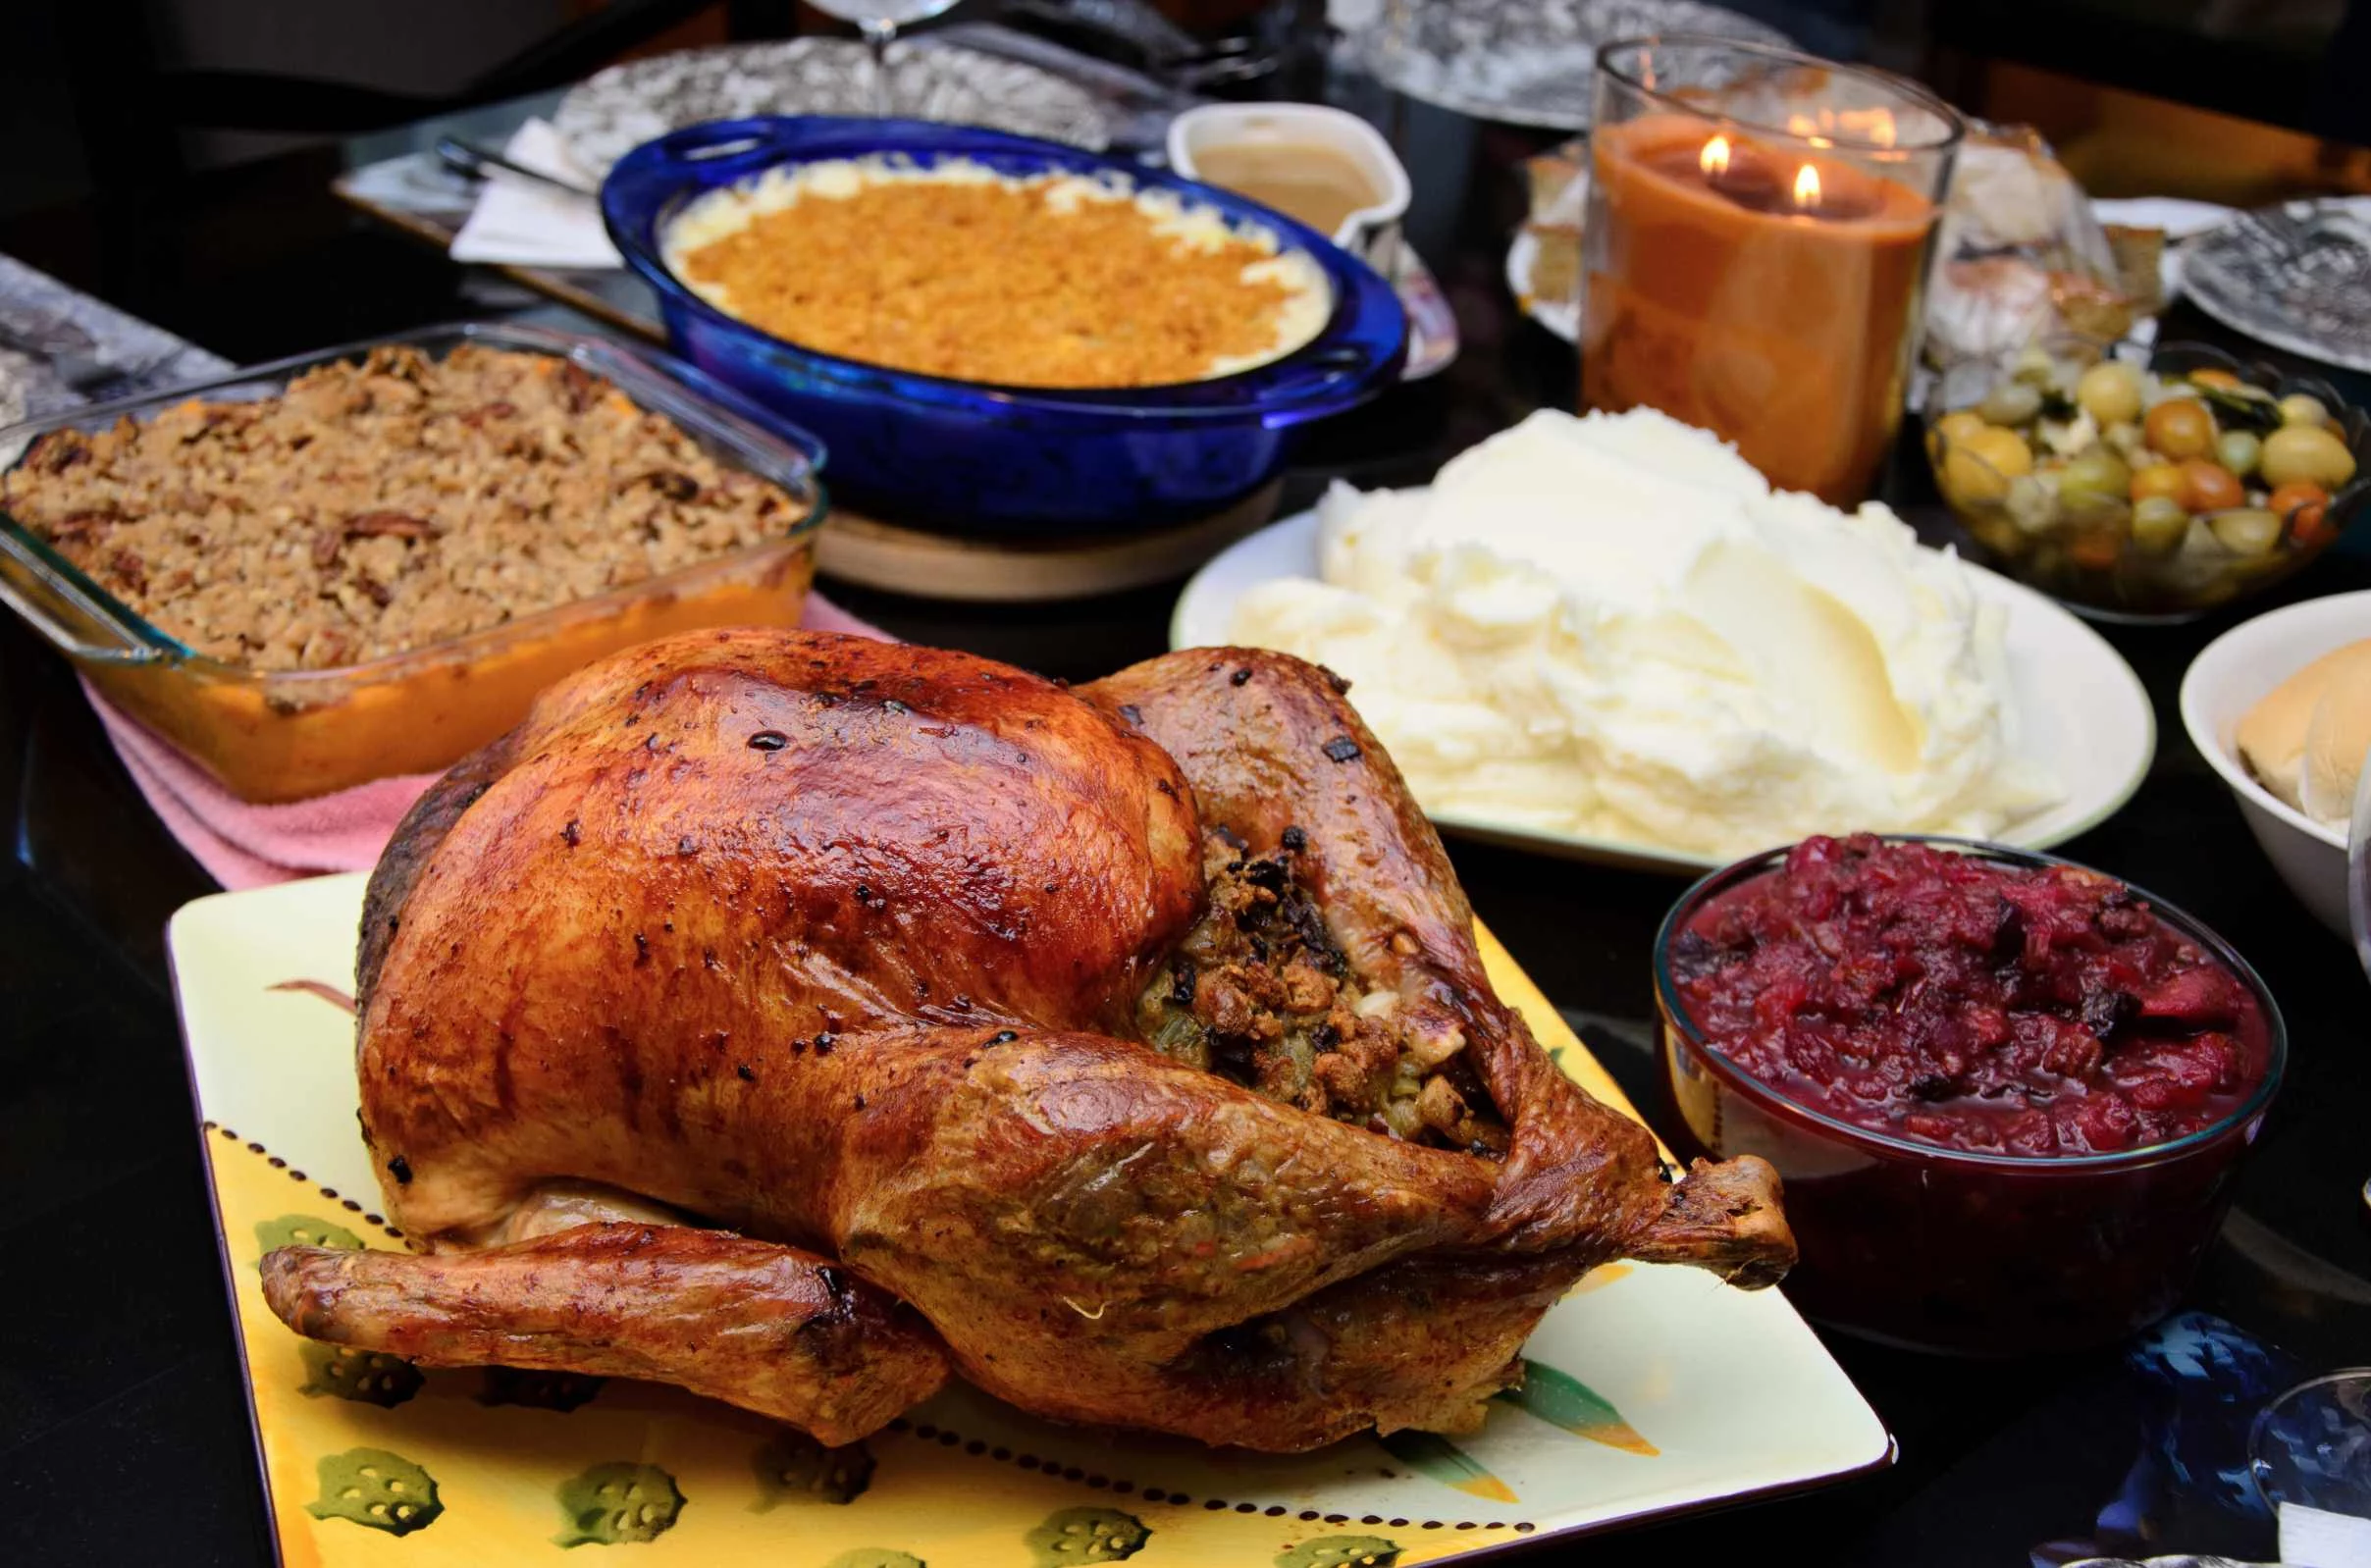 6 Ways to Reduce Your Food Waste This Thanksgiving